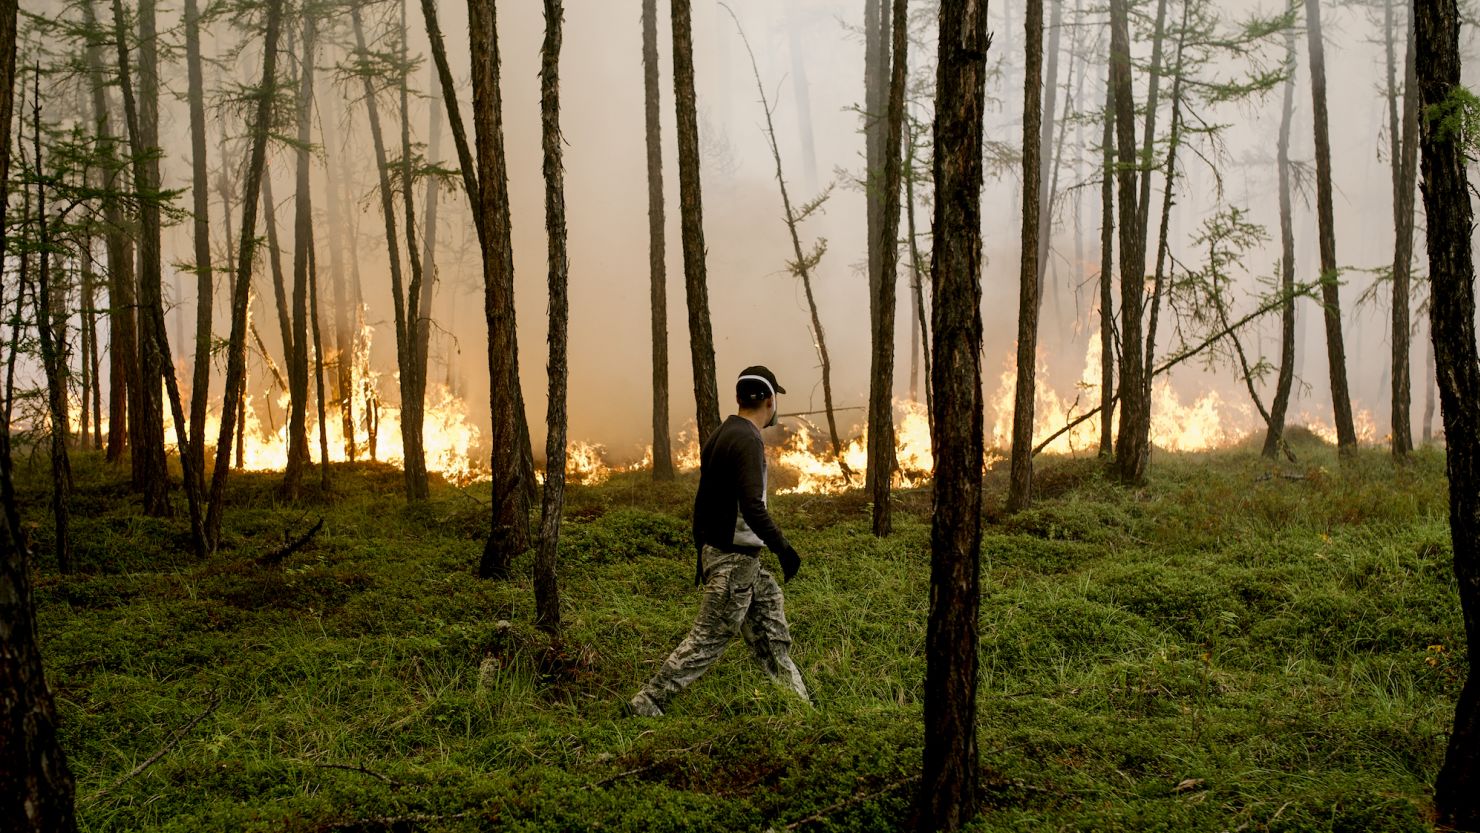 Wildfires in Sakha, Russia, in August 2021. Losing forests is one feedback loop in a complex web of changes that can accelerate the impacts of the climate crisis.